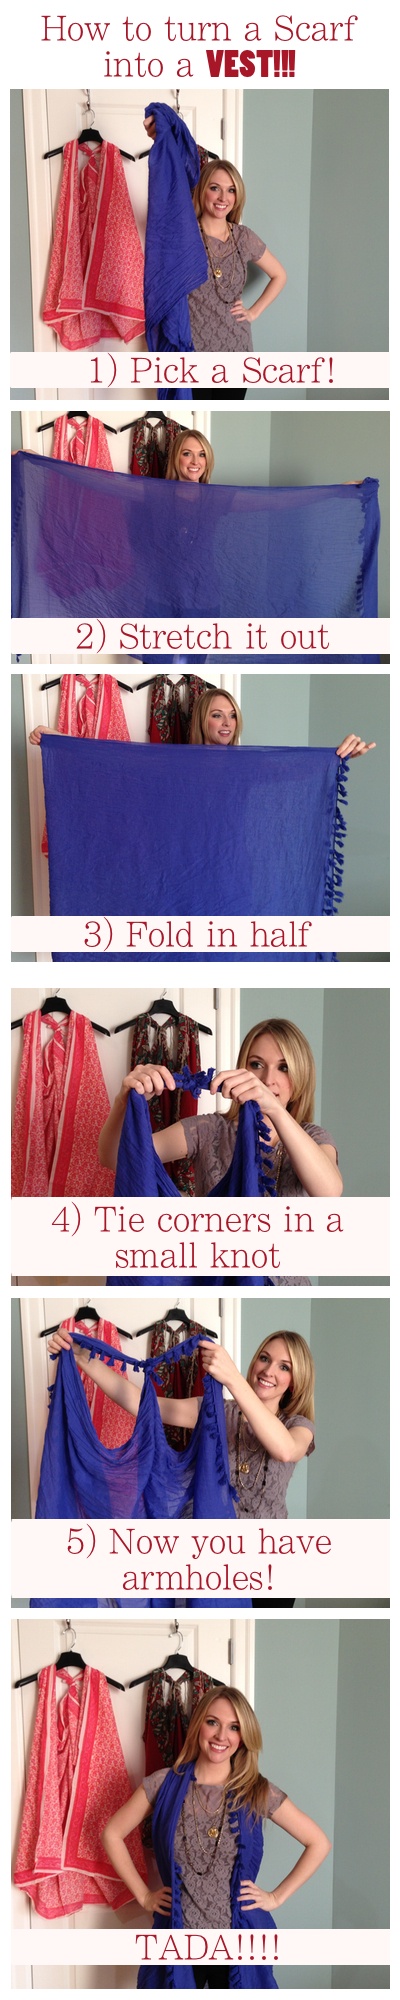 Turn a Scarf into a Vest